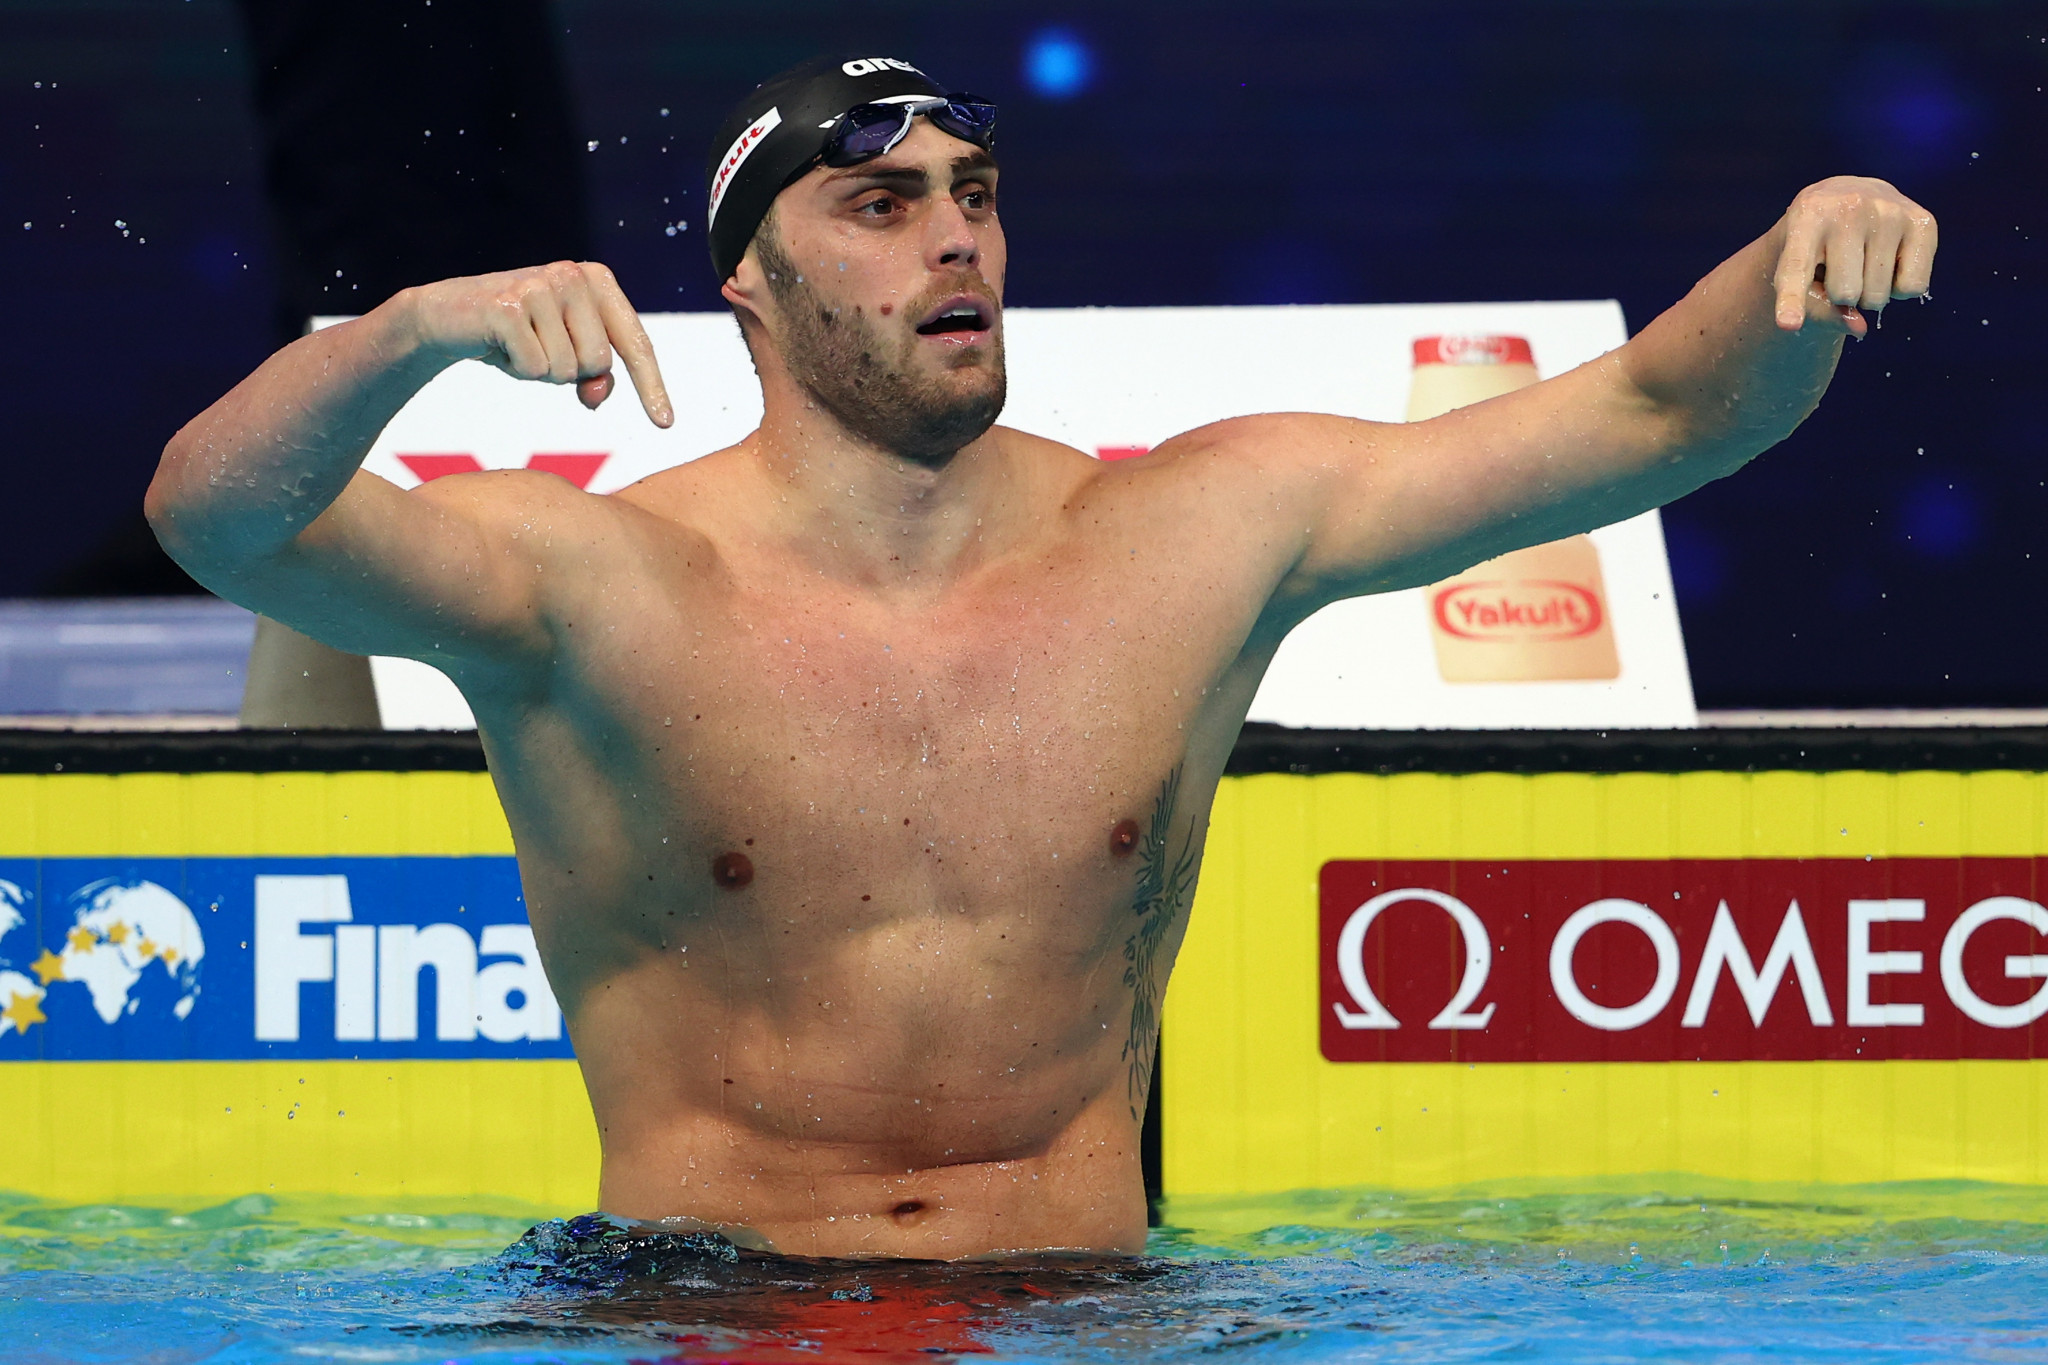 Italy's Matteo Rivolta led from start to finish to claim the men's 100m butterfly title ©Getty Images